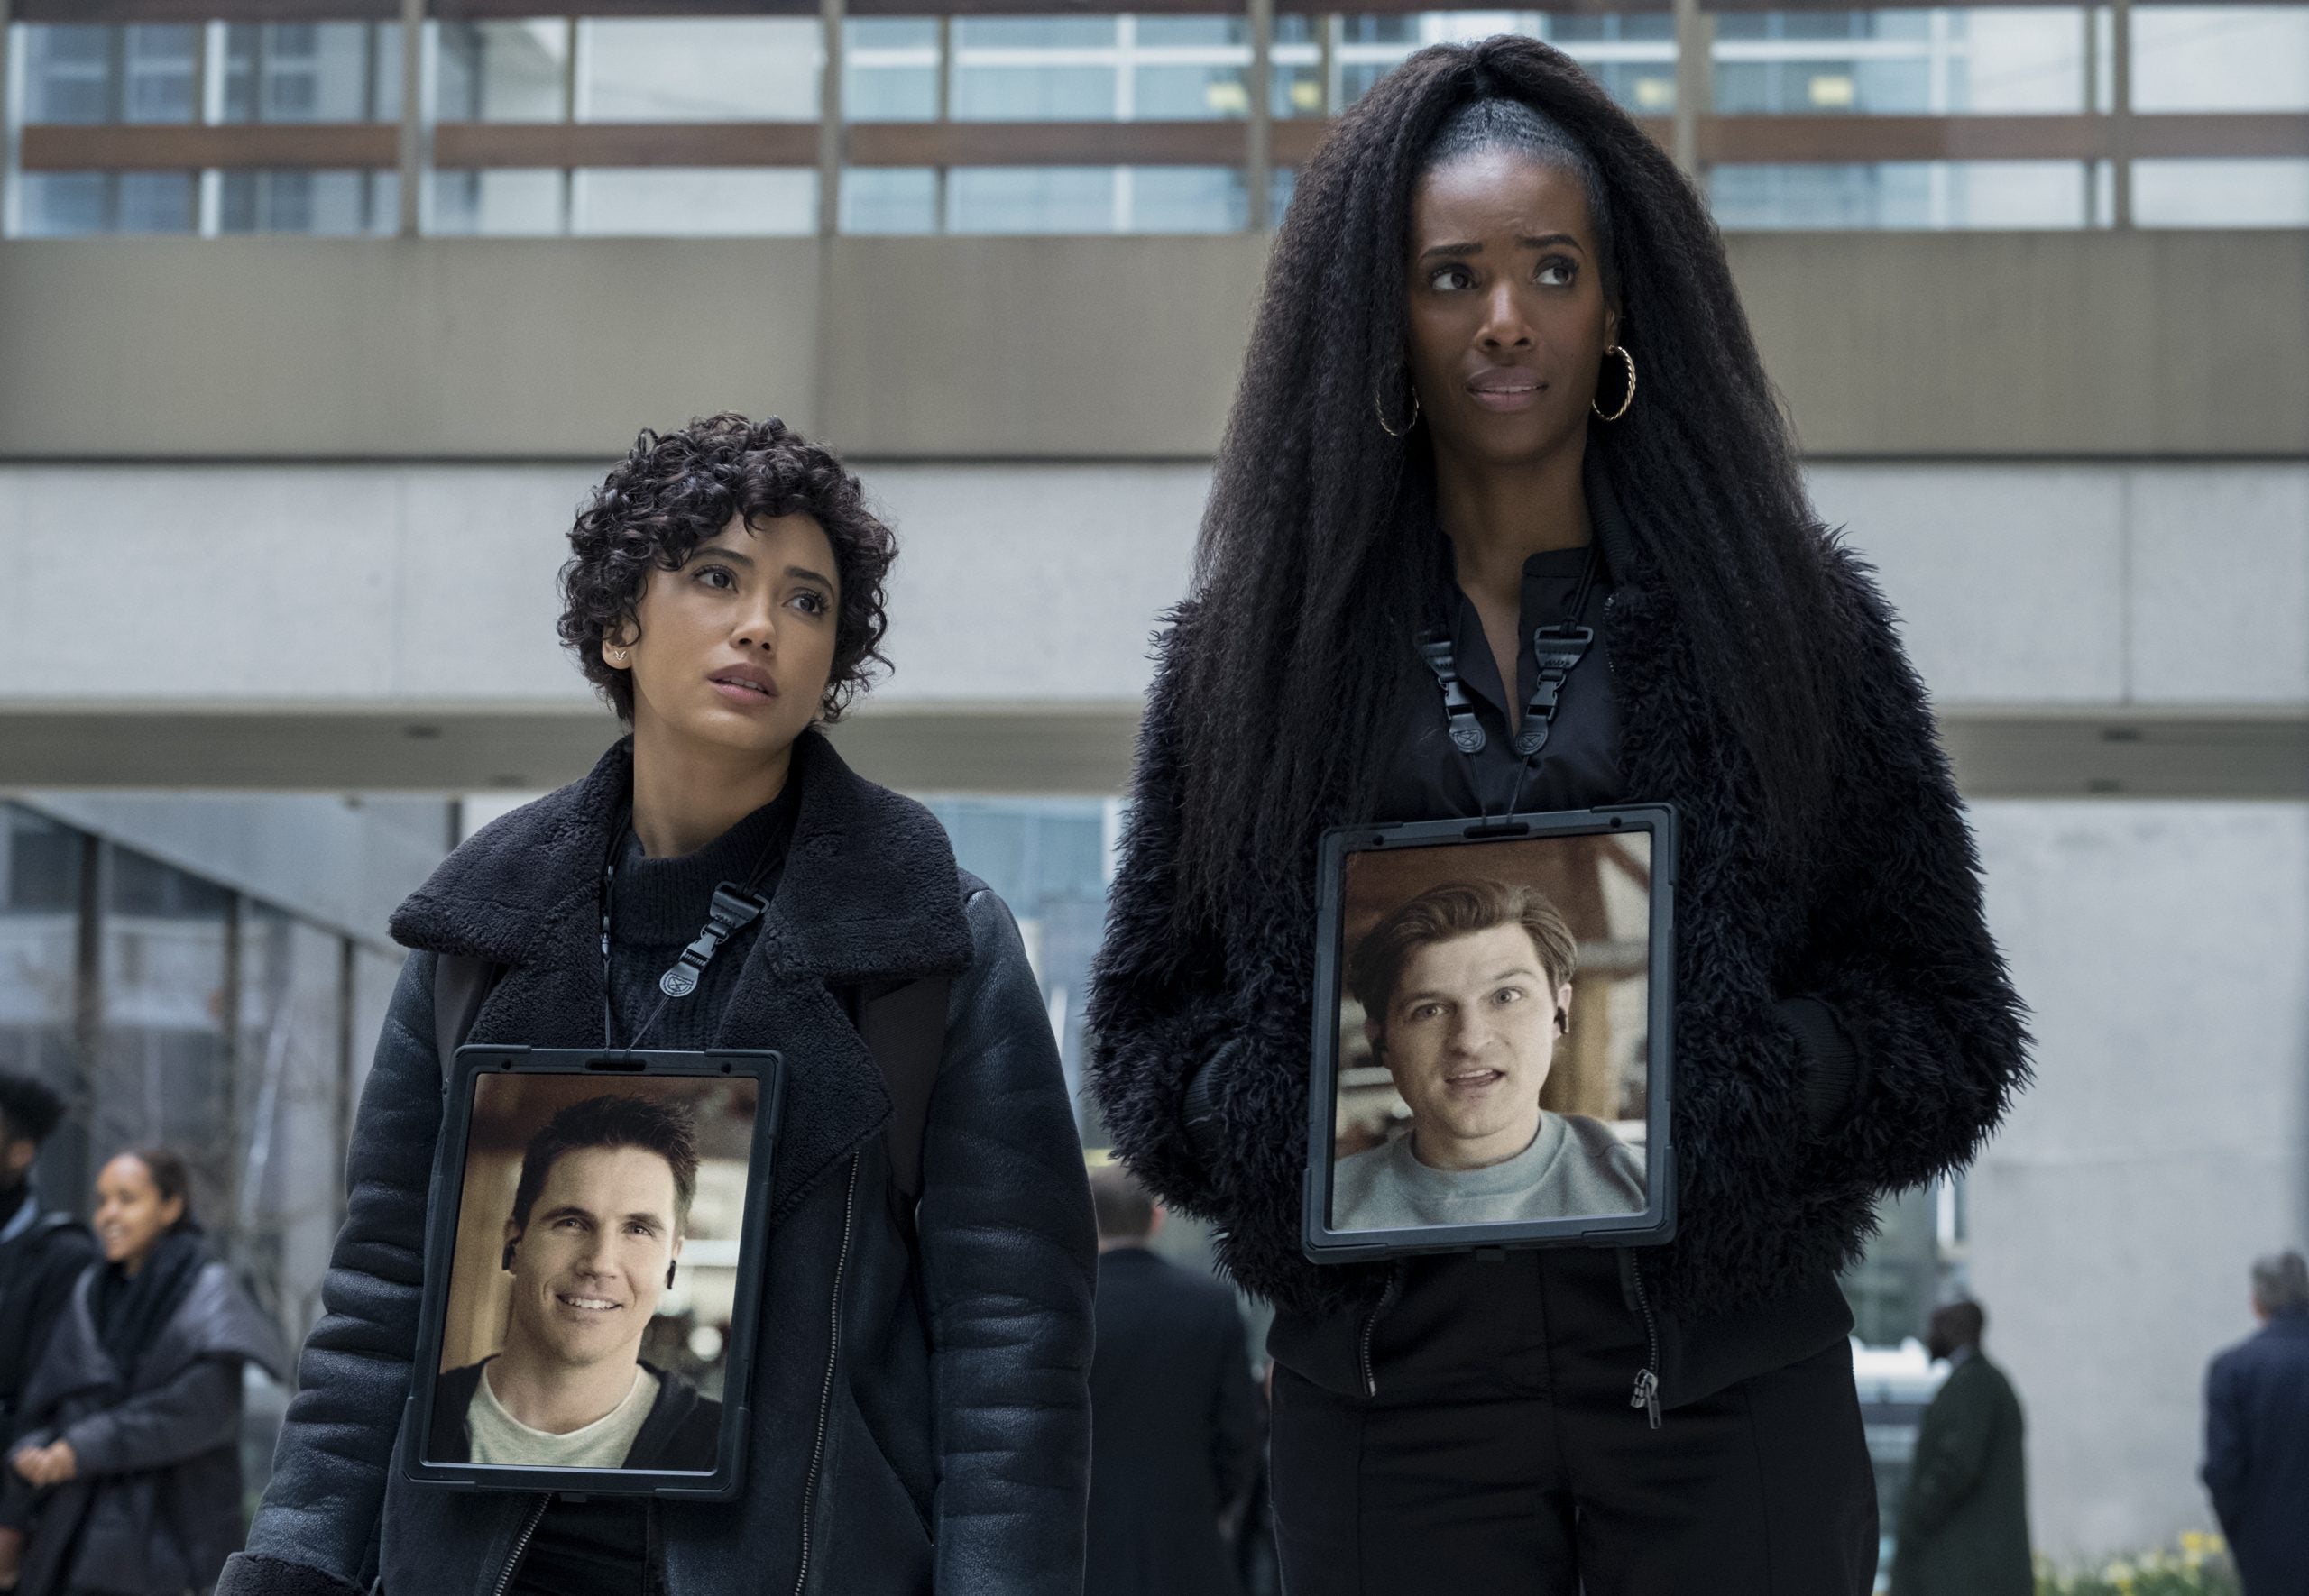 Andy Allo And Zainab Johnson On Being Authentically Black “Angels” On ‘Upload’ Season 2